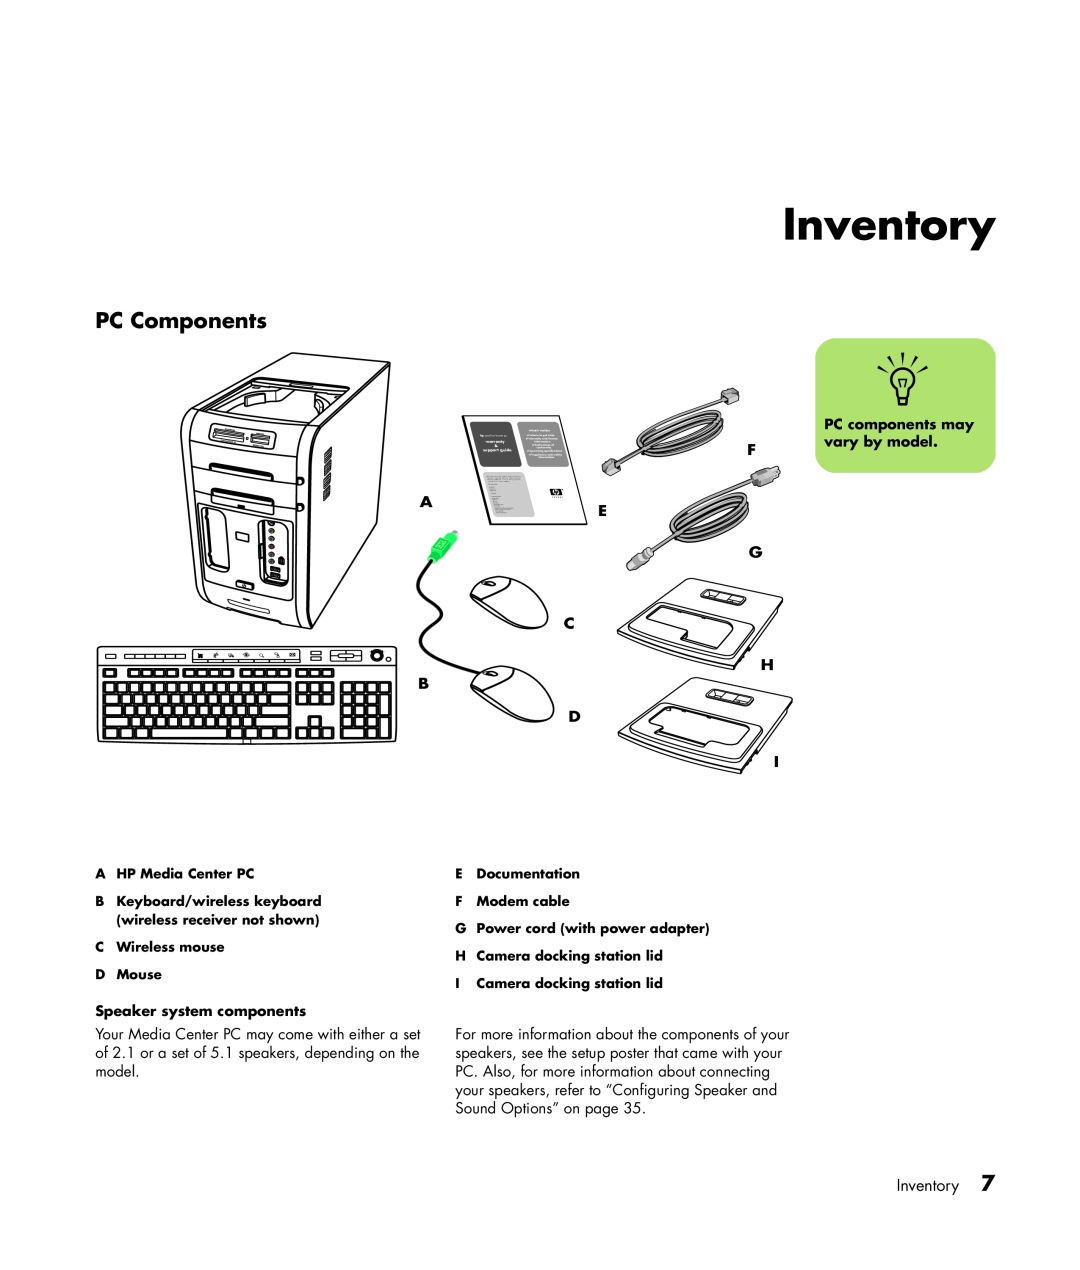 HP m1270n Inventory, PC Components, vary by model, Ae G C, H B D I, Speaker system components, PC components may, warranty 